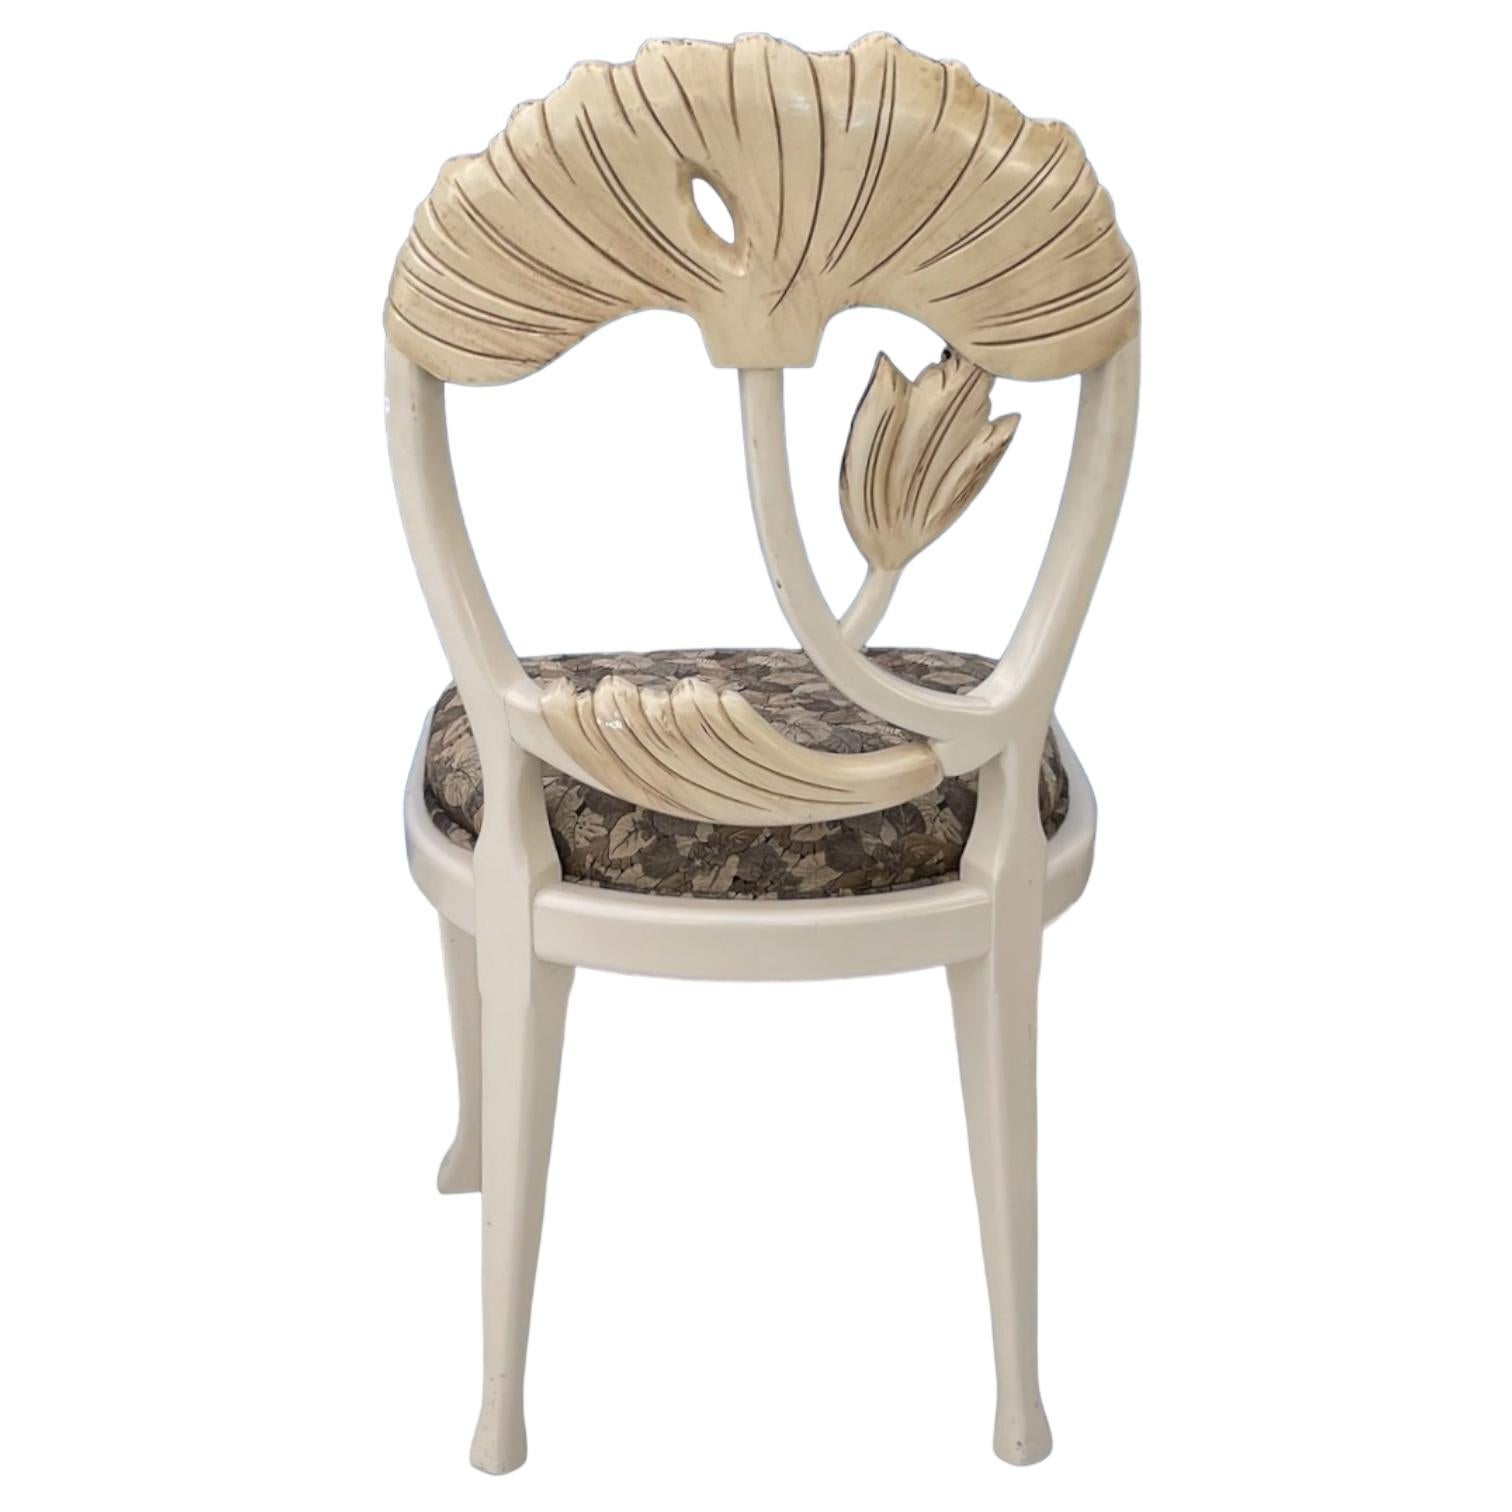 Italian Andre Originals Lotus Carved Wood Art Nouveau Style Dining Chairs - S/8 For Sale 1